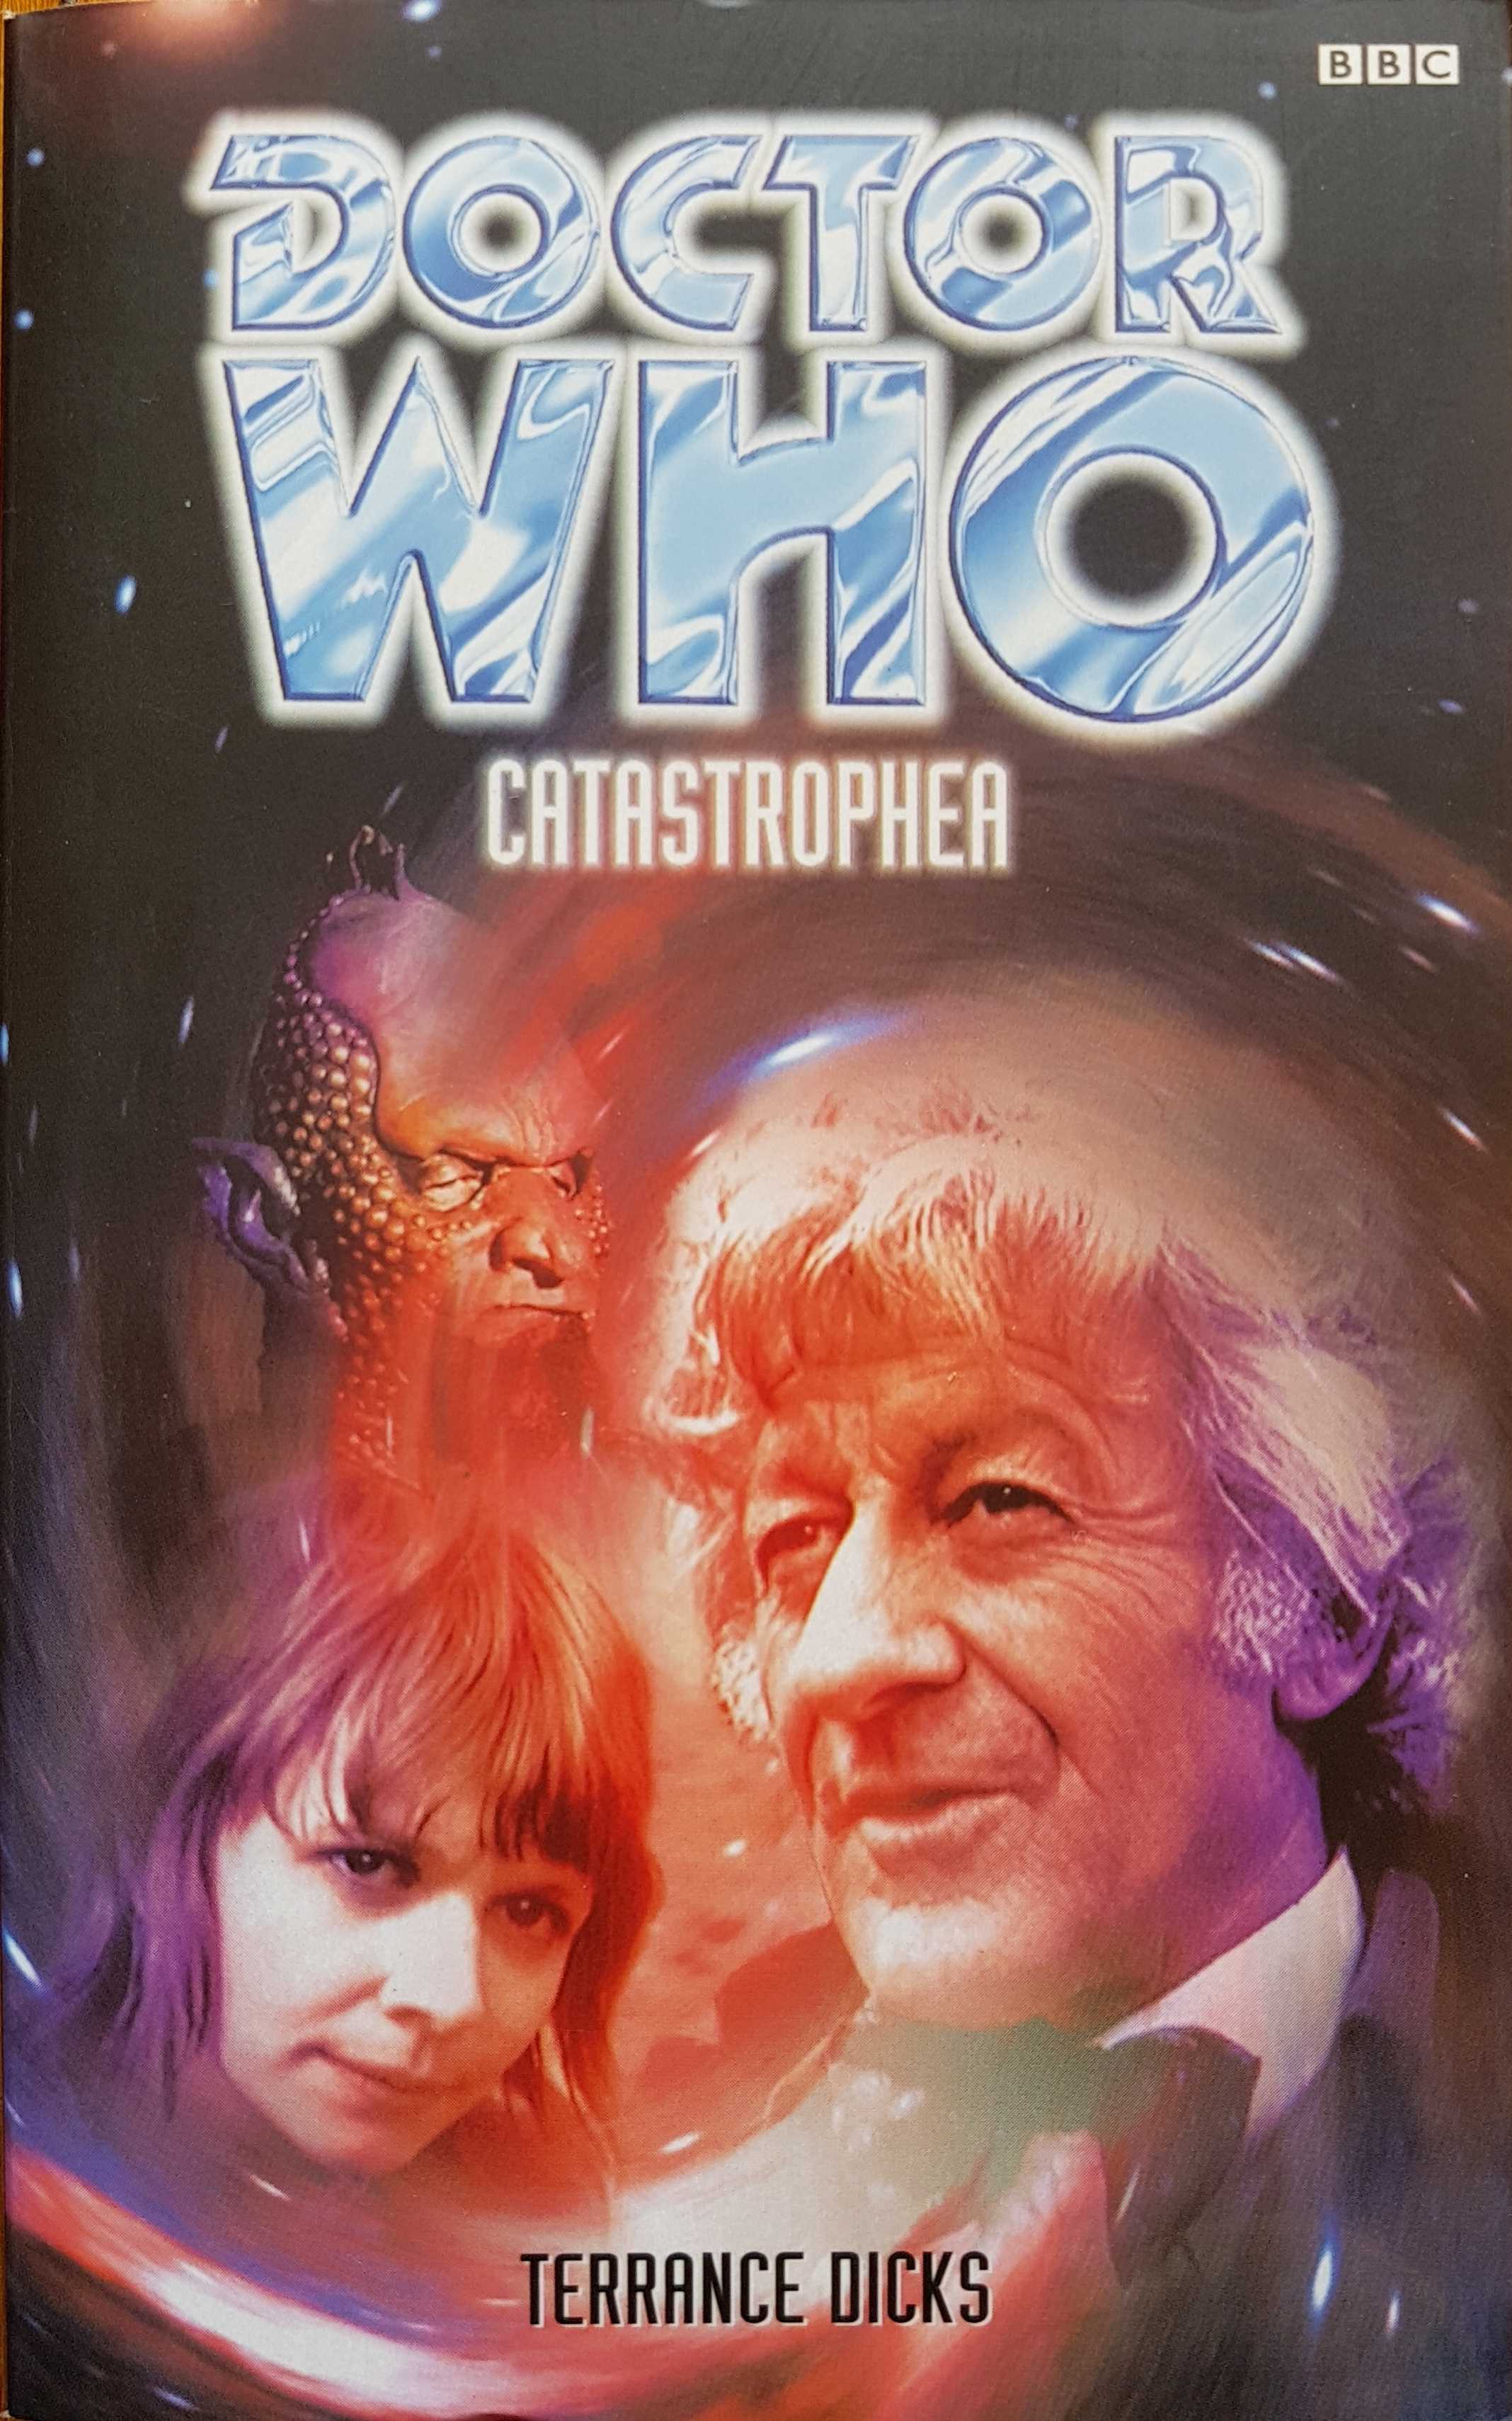 Picture of 0-563-40584-8 Doctor Who - Catastropher by artist Terrance Dicks from the BBC records and Tapes library